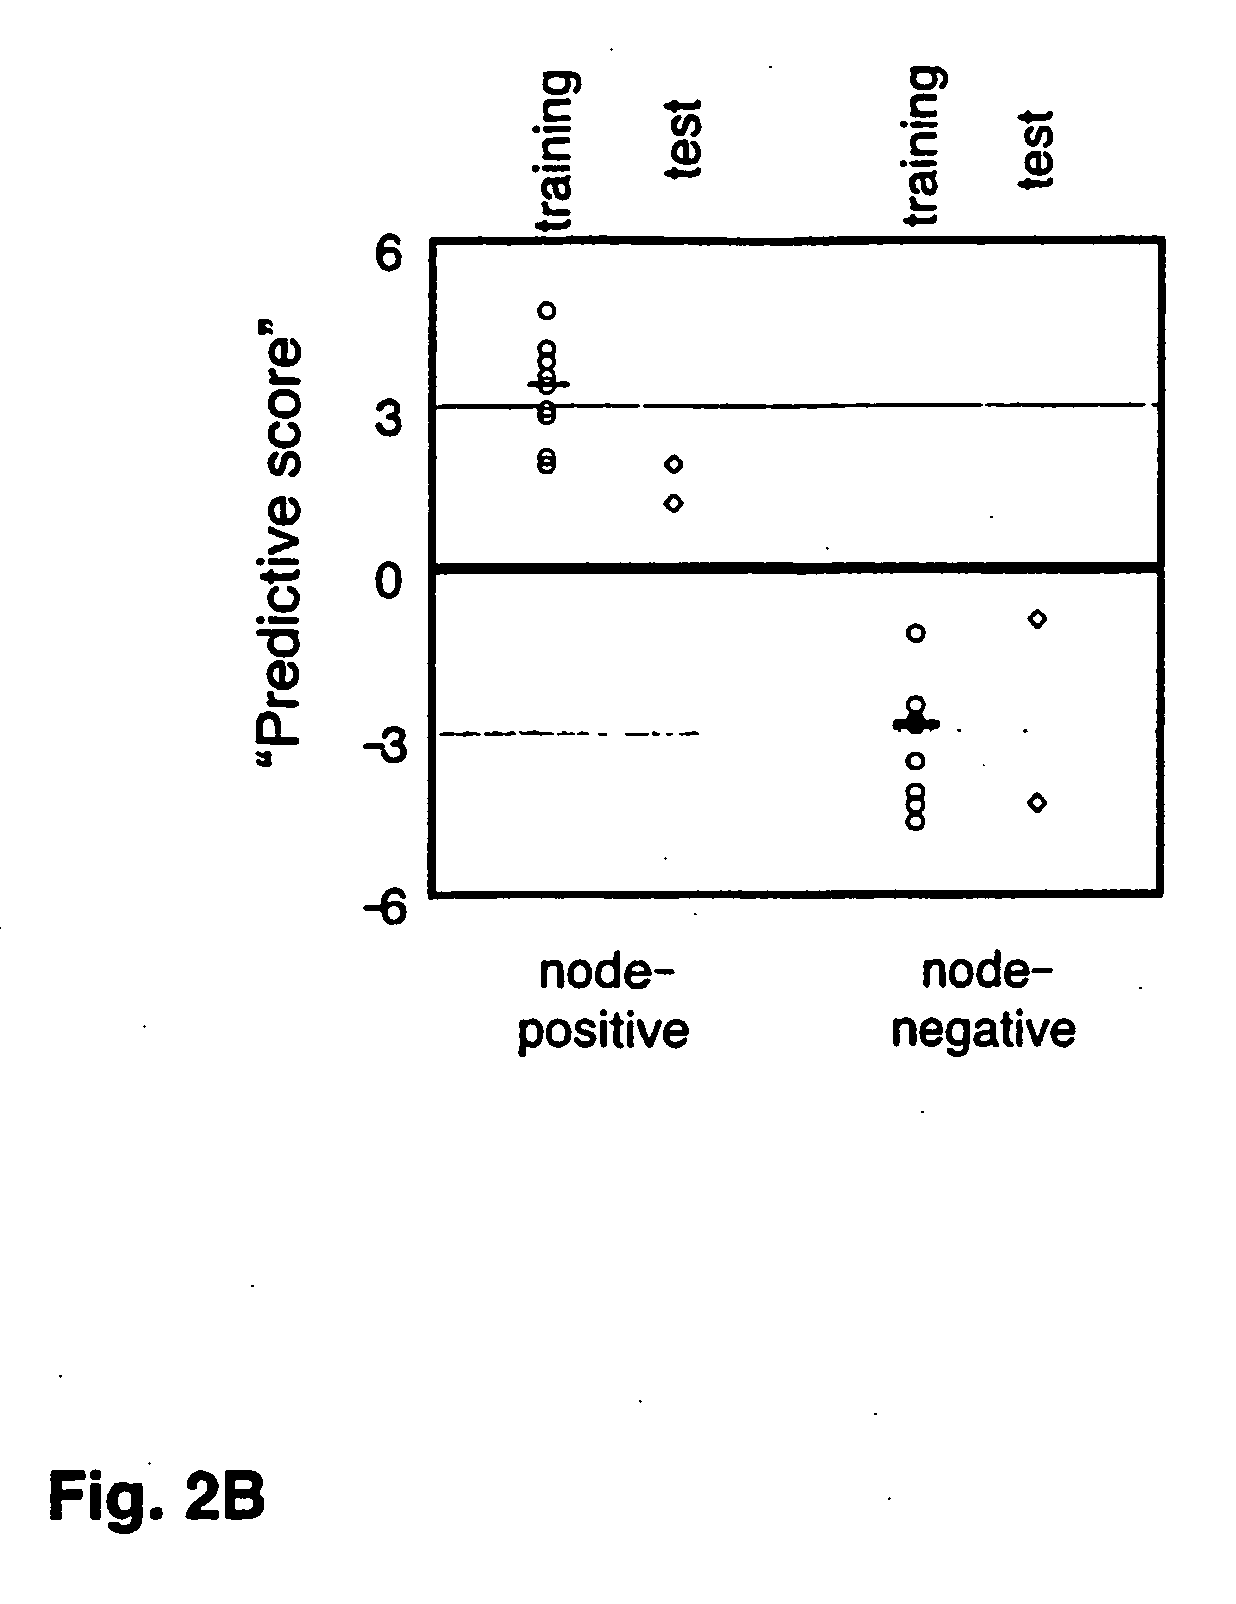 Method for diagnosis of intestinal-type gastric tumors